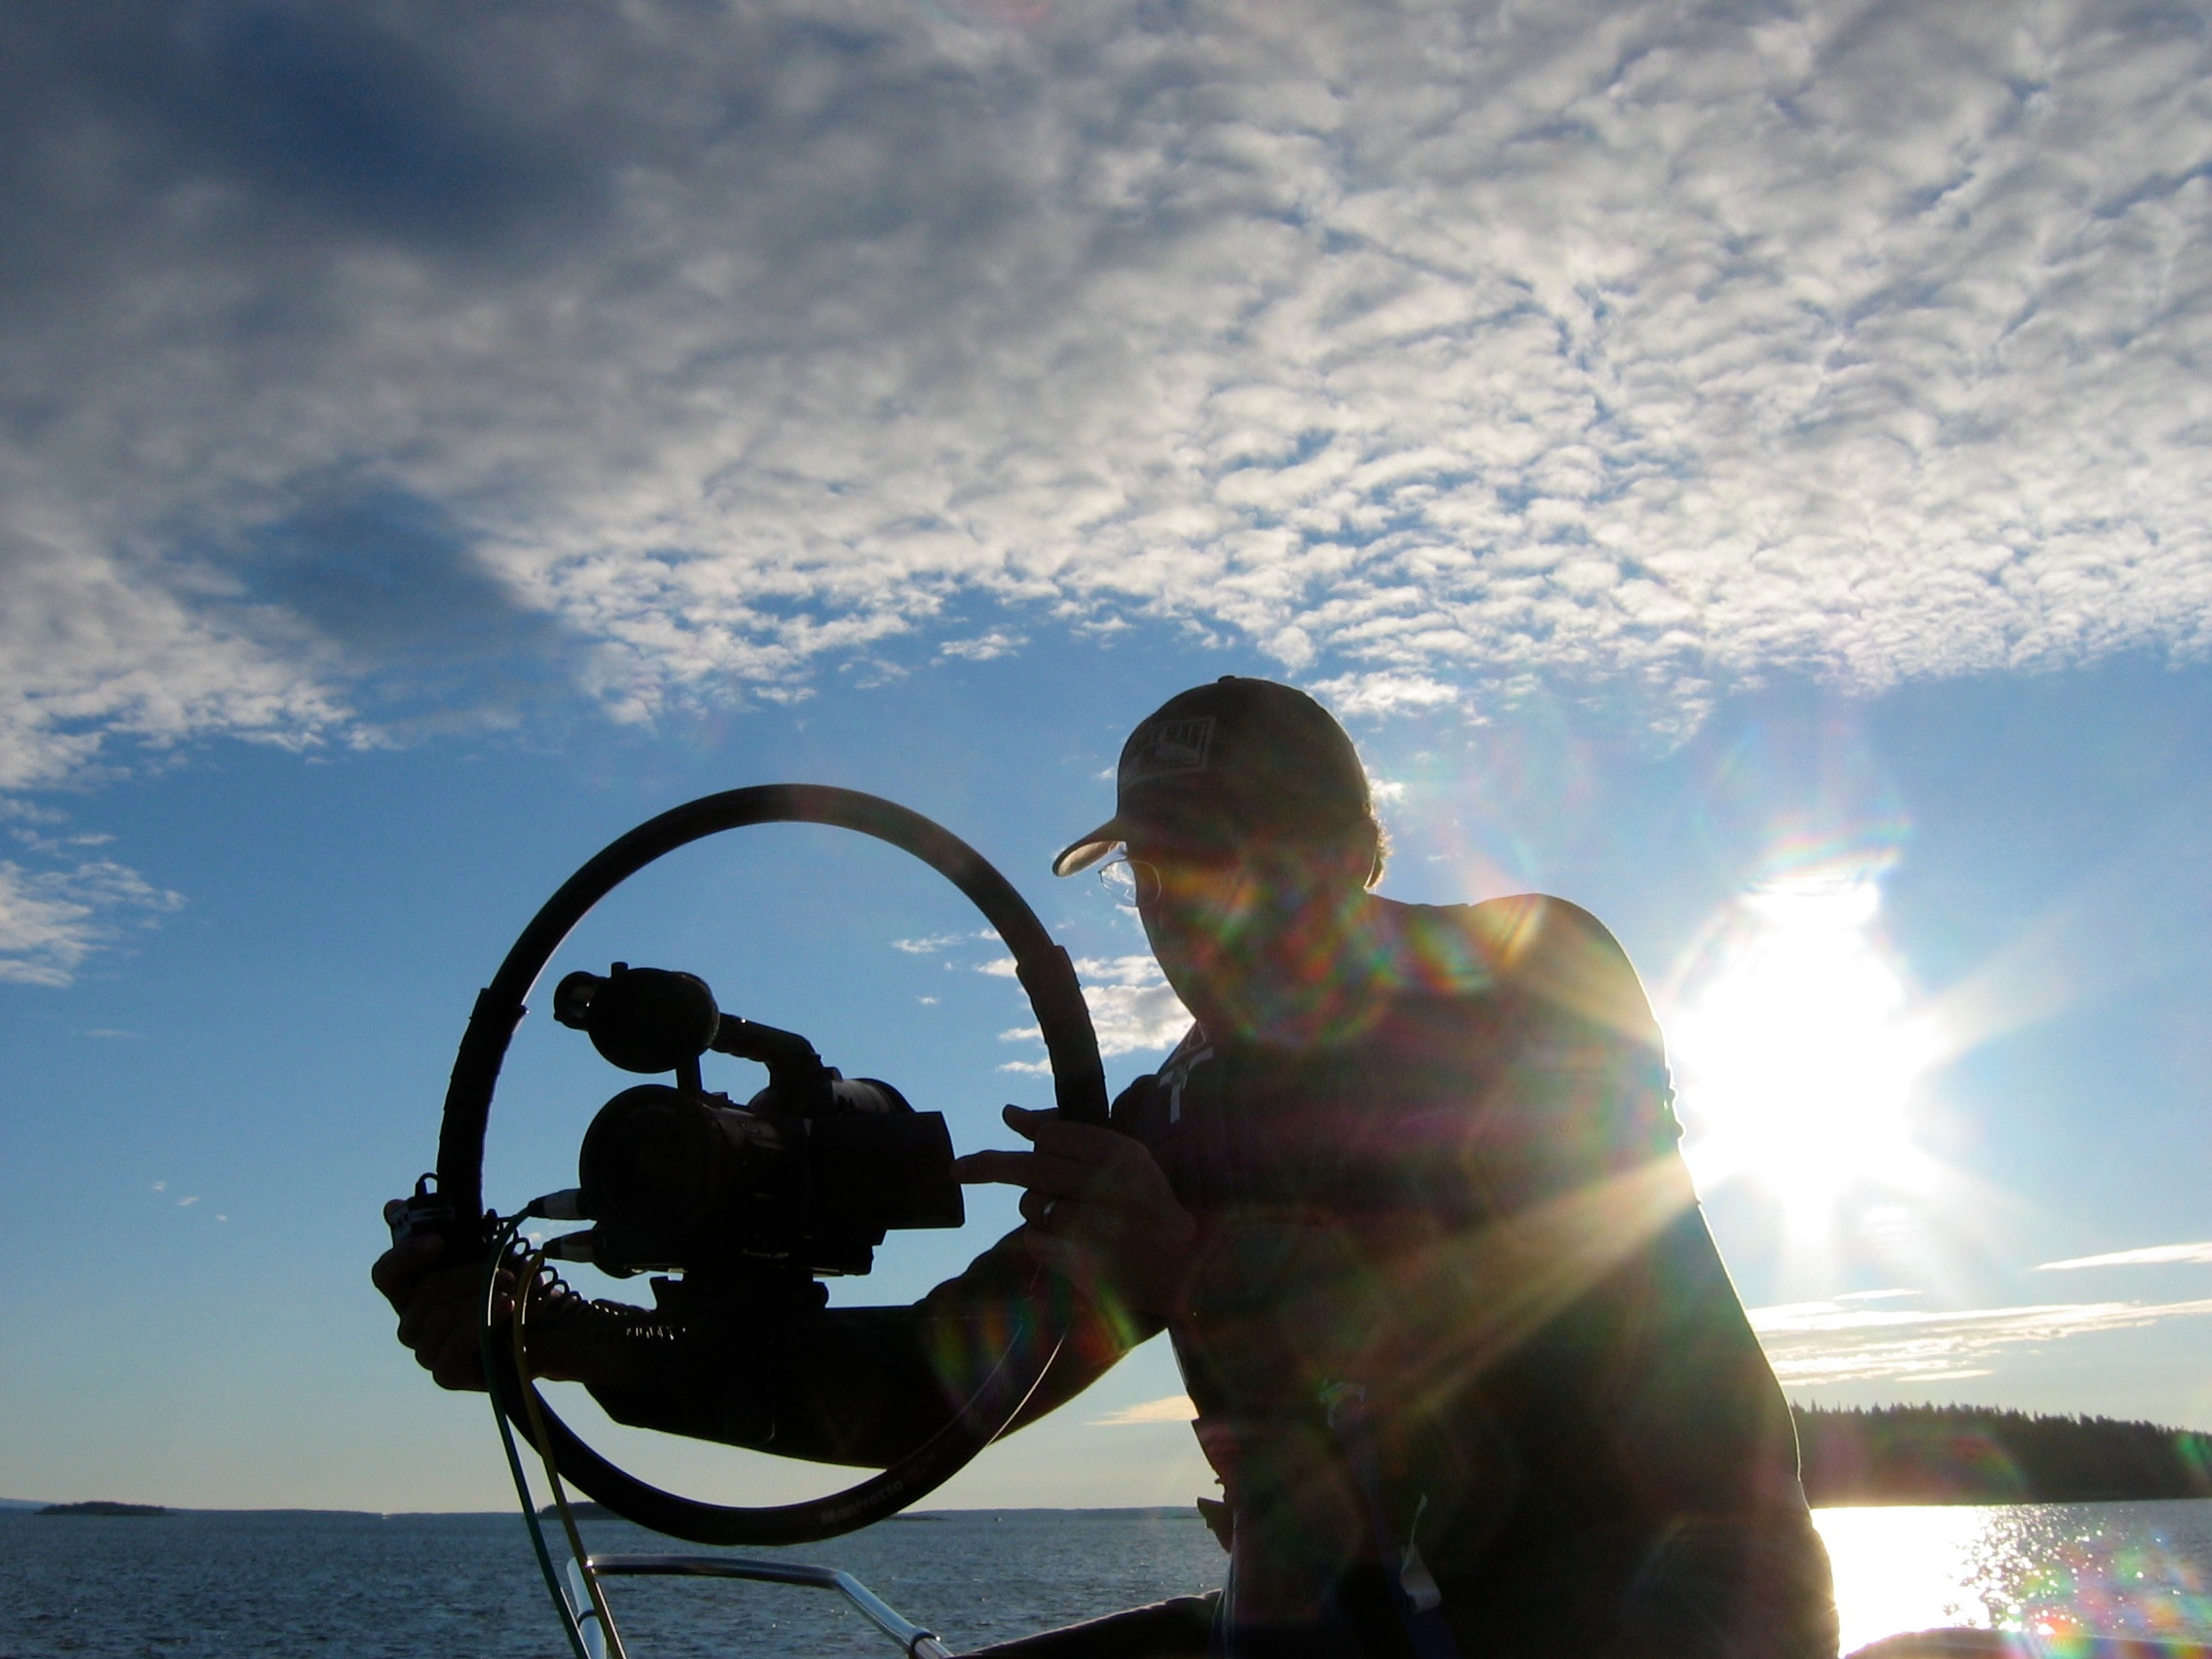 Shooting for Bayliner Boats on location in Channel Islands, California.